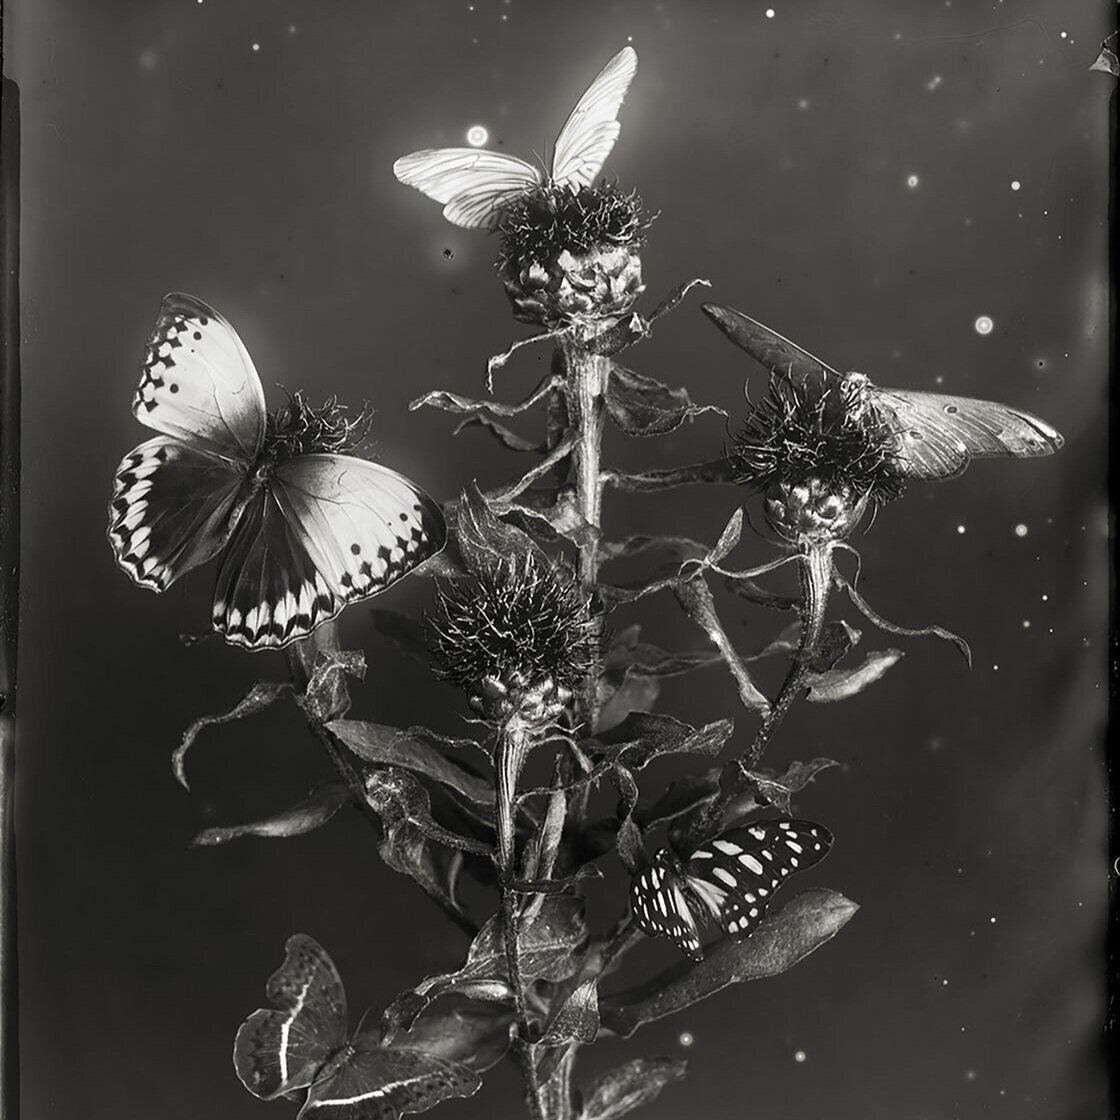   Whitney Lewis-Smith  Death of the Moth  , 2014  Archival Pigment Ink Print on 100% Cotton Rag Paper  19 x 16 in  Edition 4/20  Jennifer Kostuik Gallery 